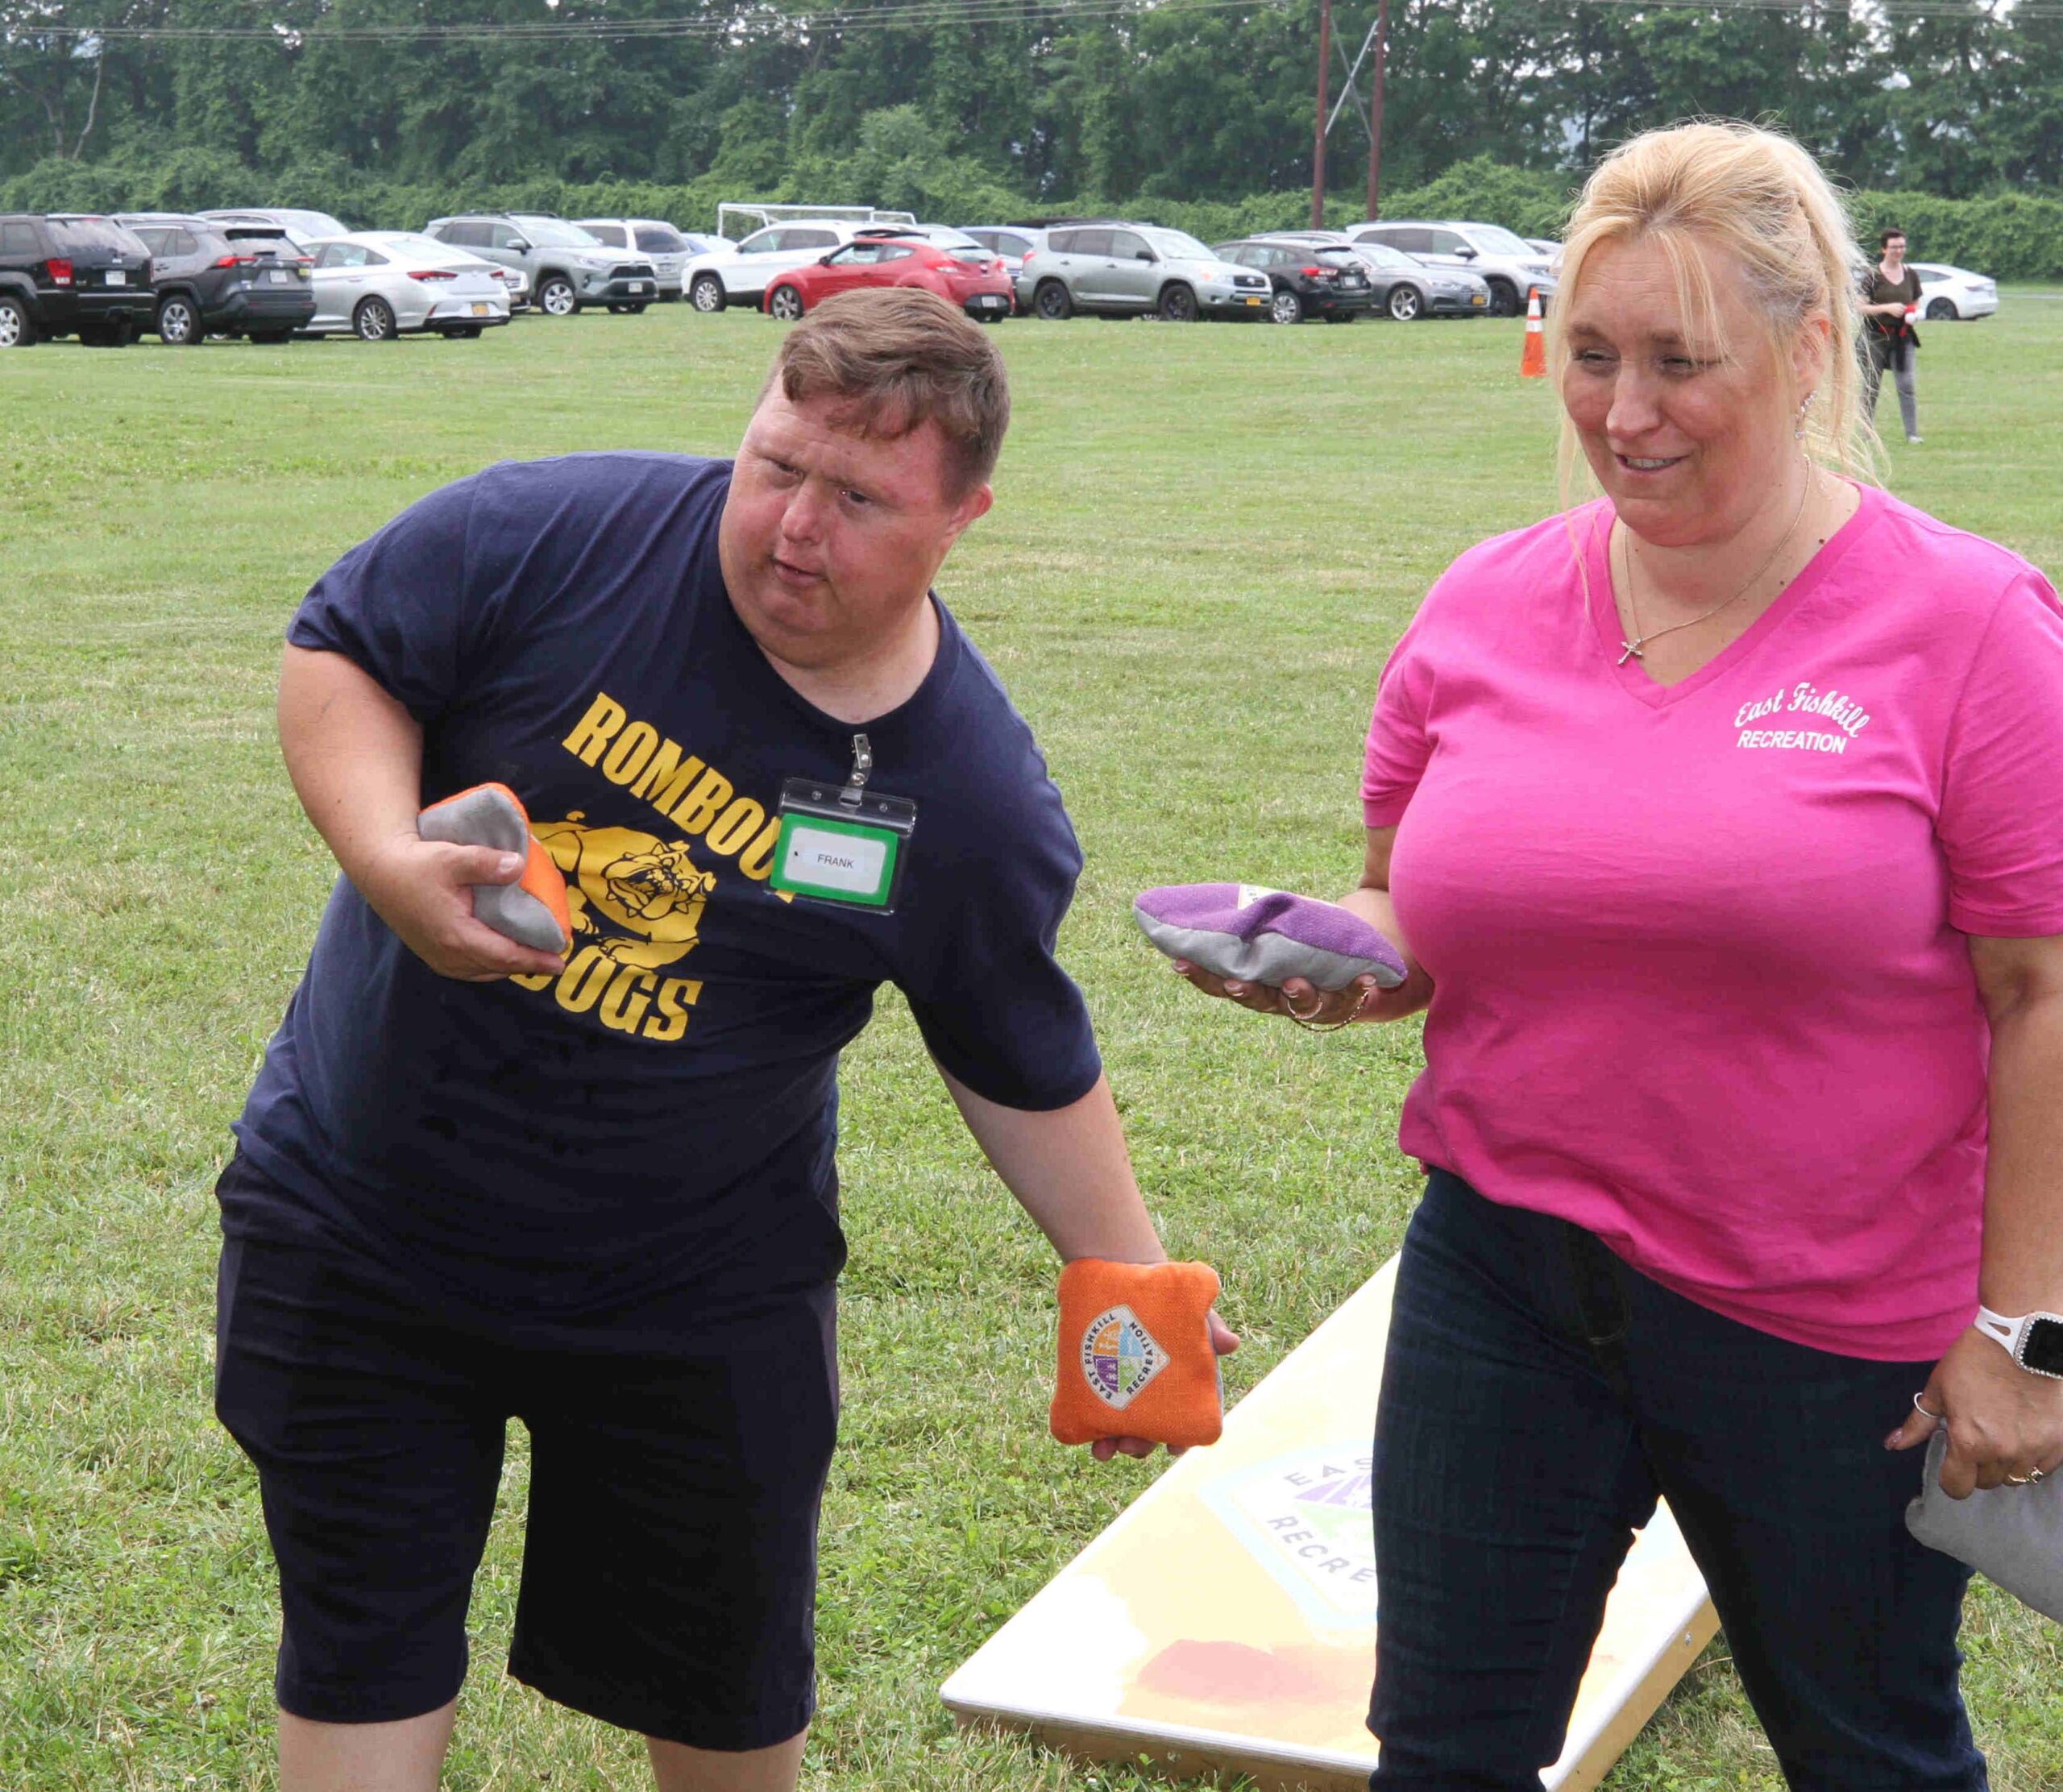 One of our many vendors from the day was East Fishkill Recreation. Here Christine S from East Fishkill Recreation plays cornhole with an attendee at the 3rd Annual ThinkDIFFERENTLY Fitness & Field Day on Friday June 29, 2023 at Bowdoin Park.